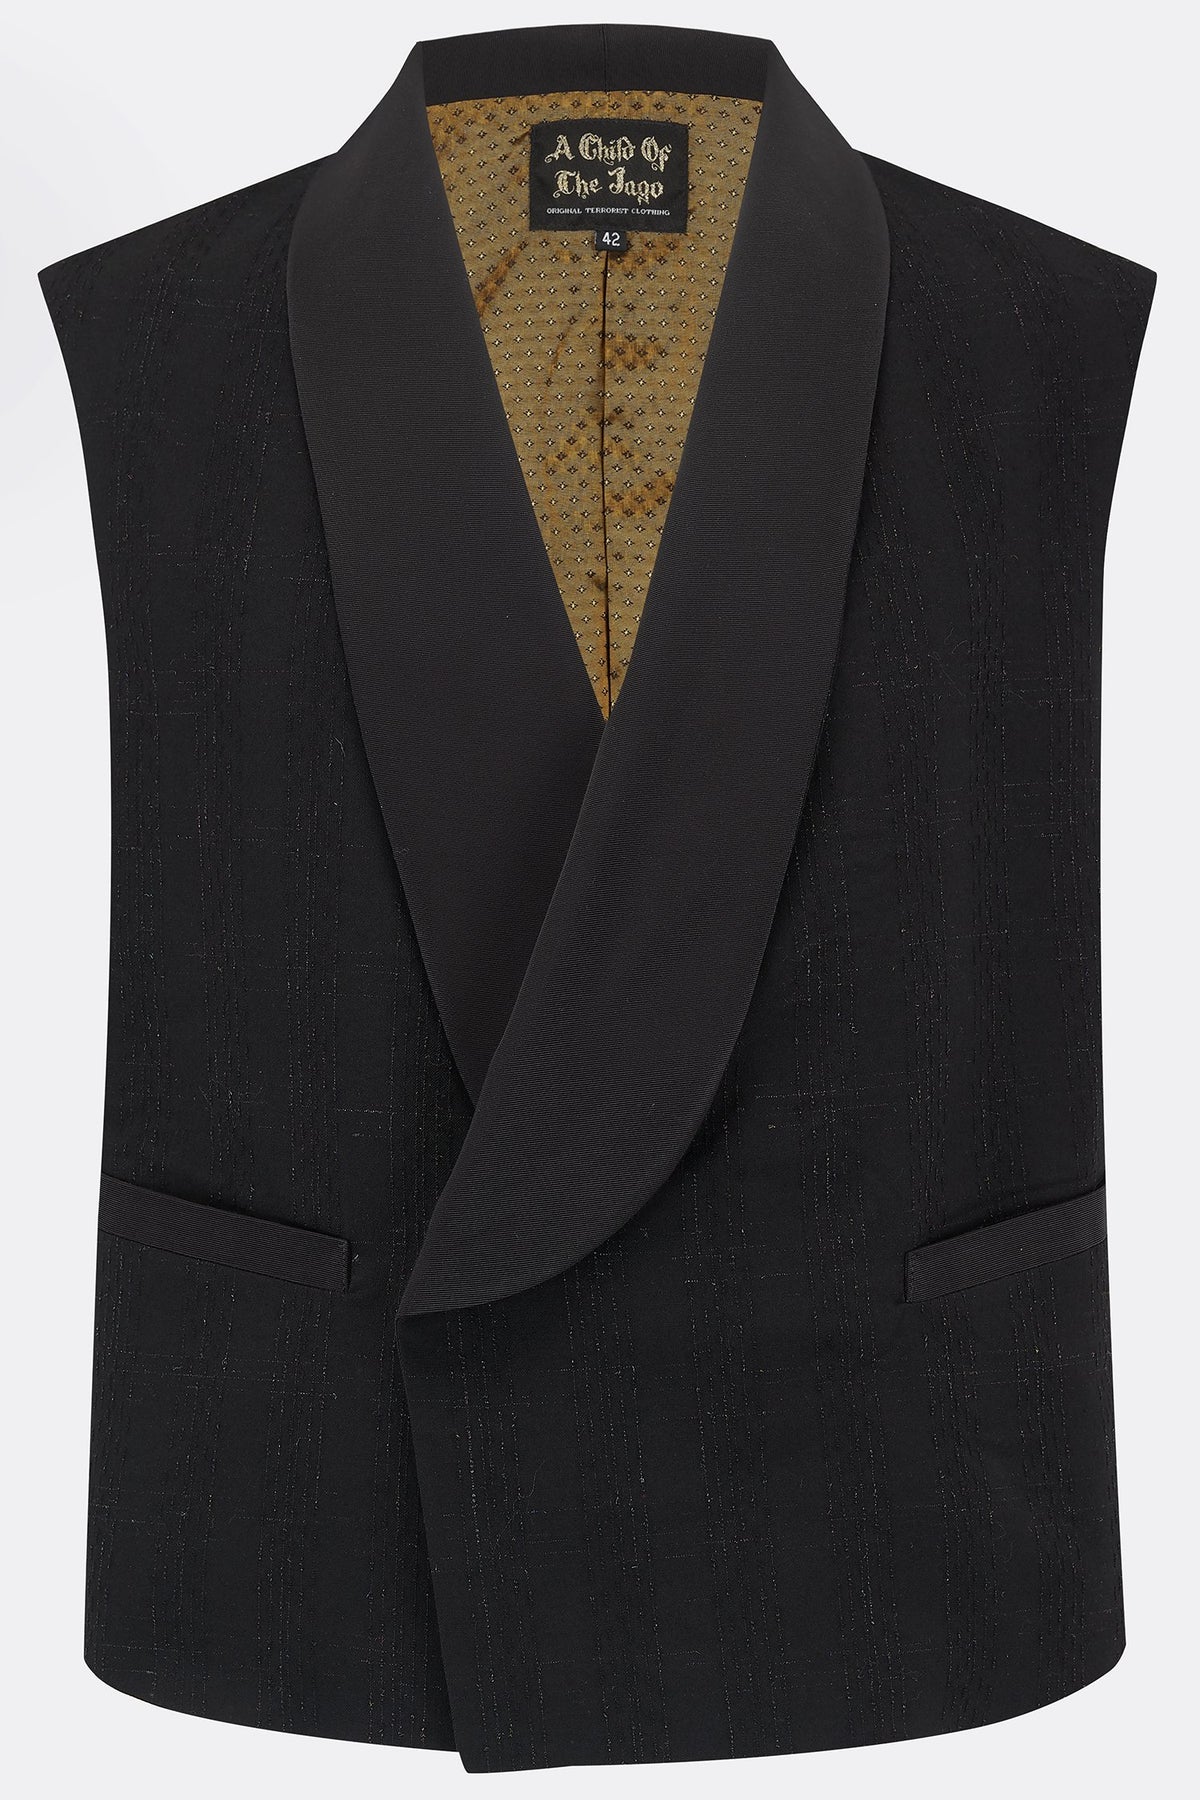 DILLINGER WAISTCOAT IN BLACK WOOL-menswear-A Child Of The Jago